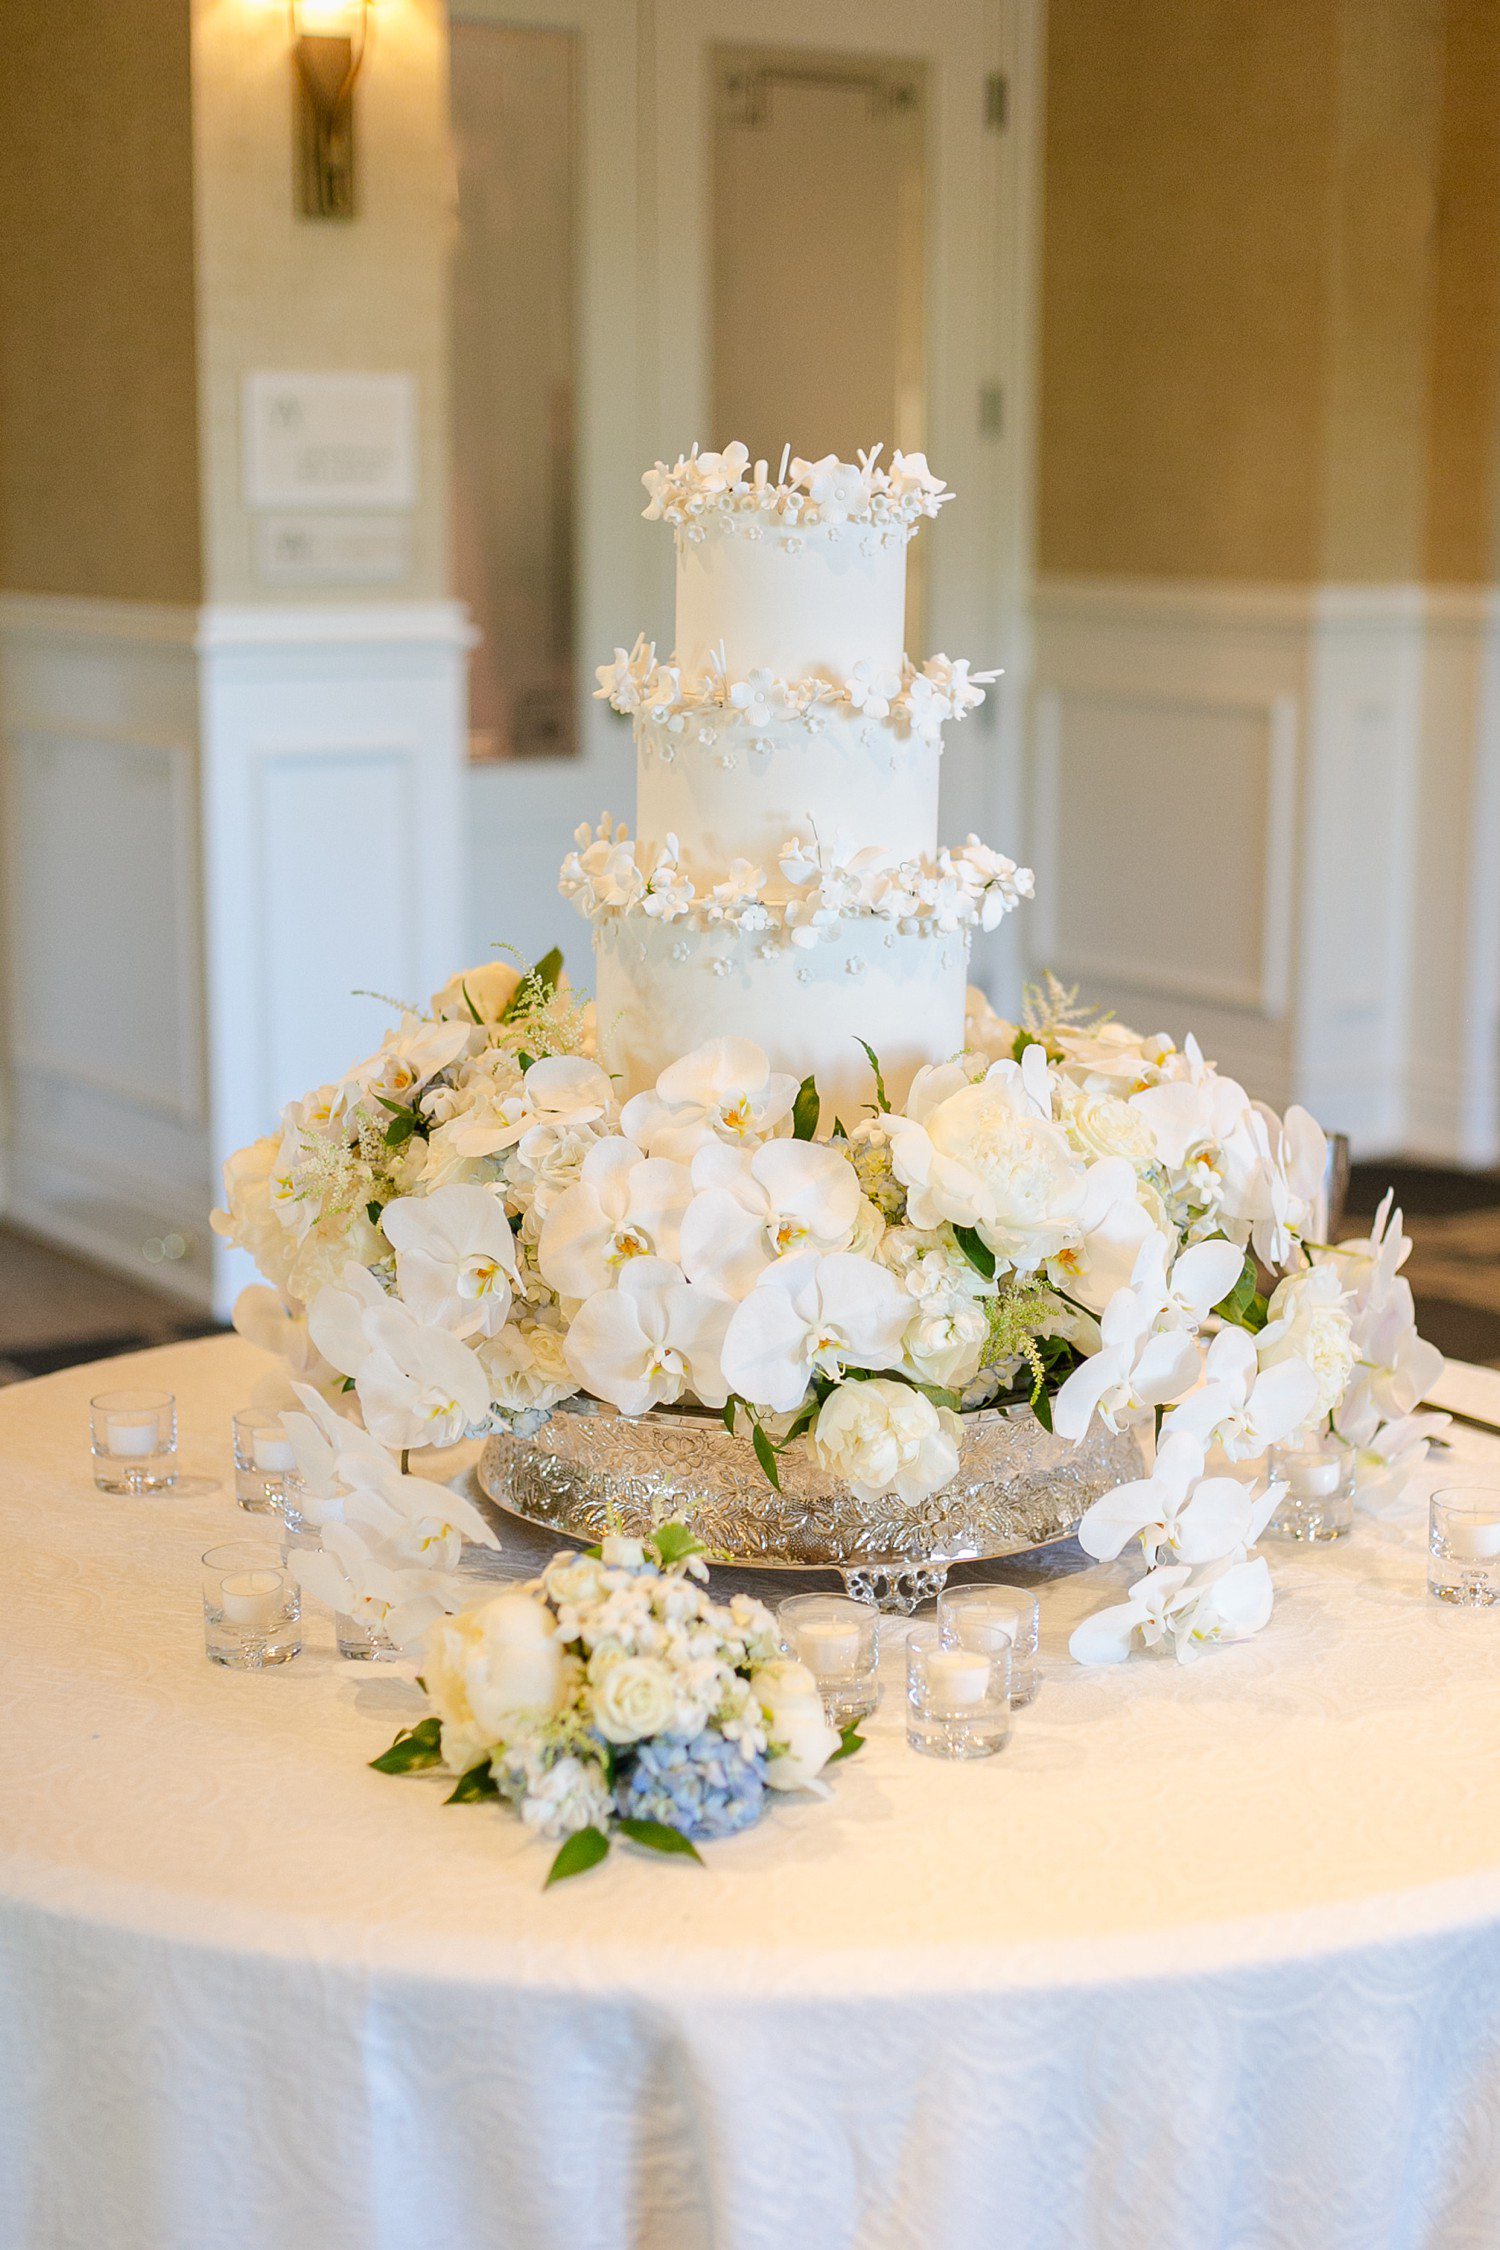 Tiered white wedding cake with white orchid flowers.